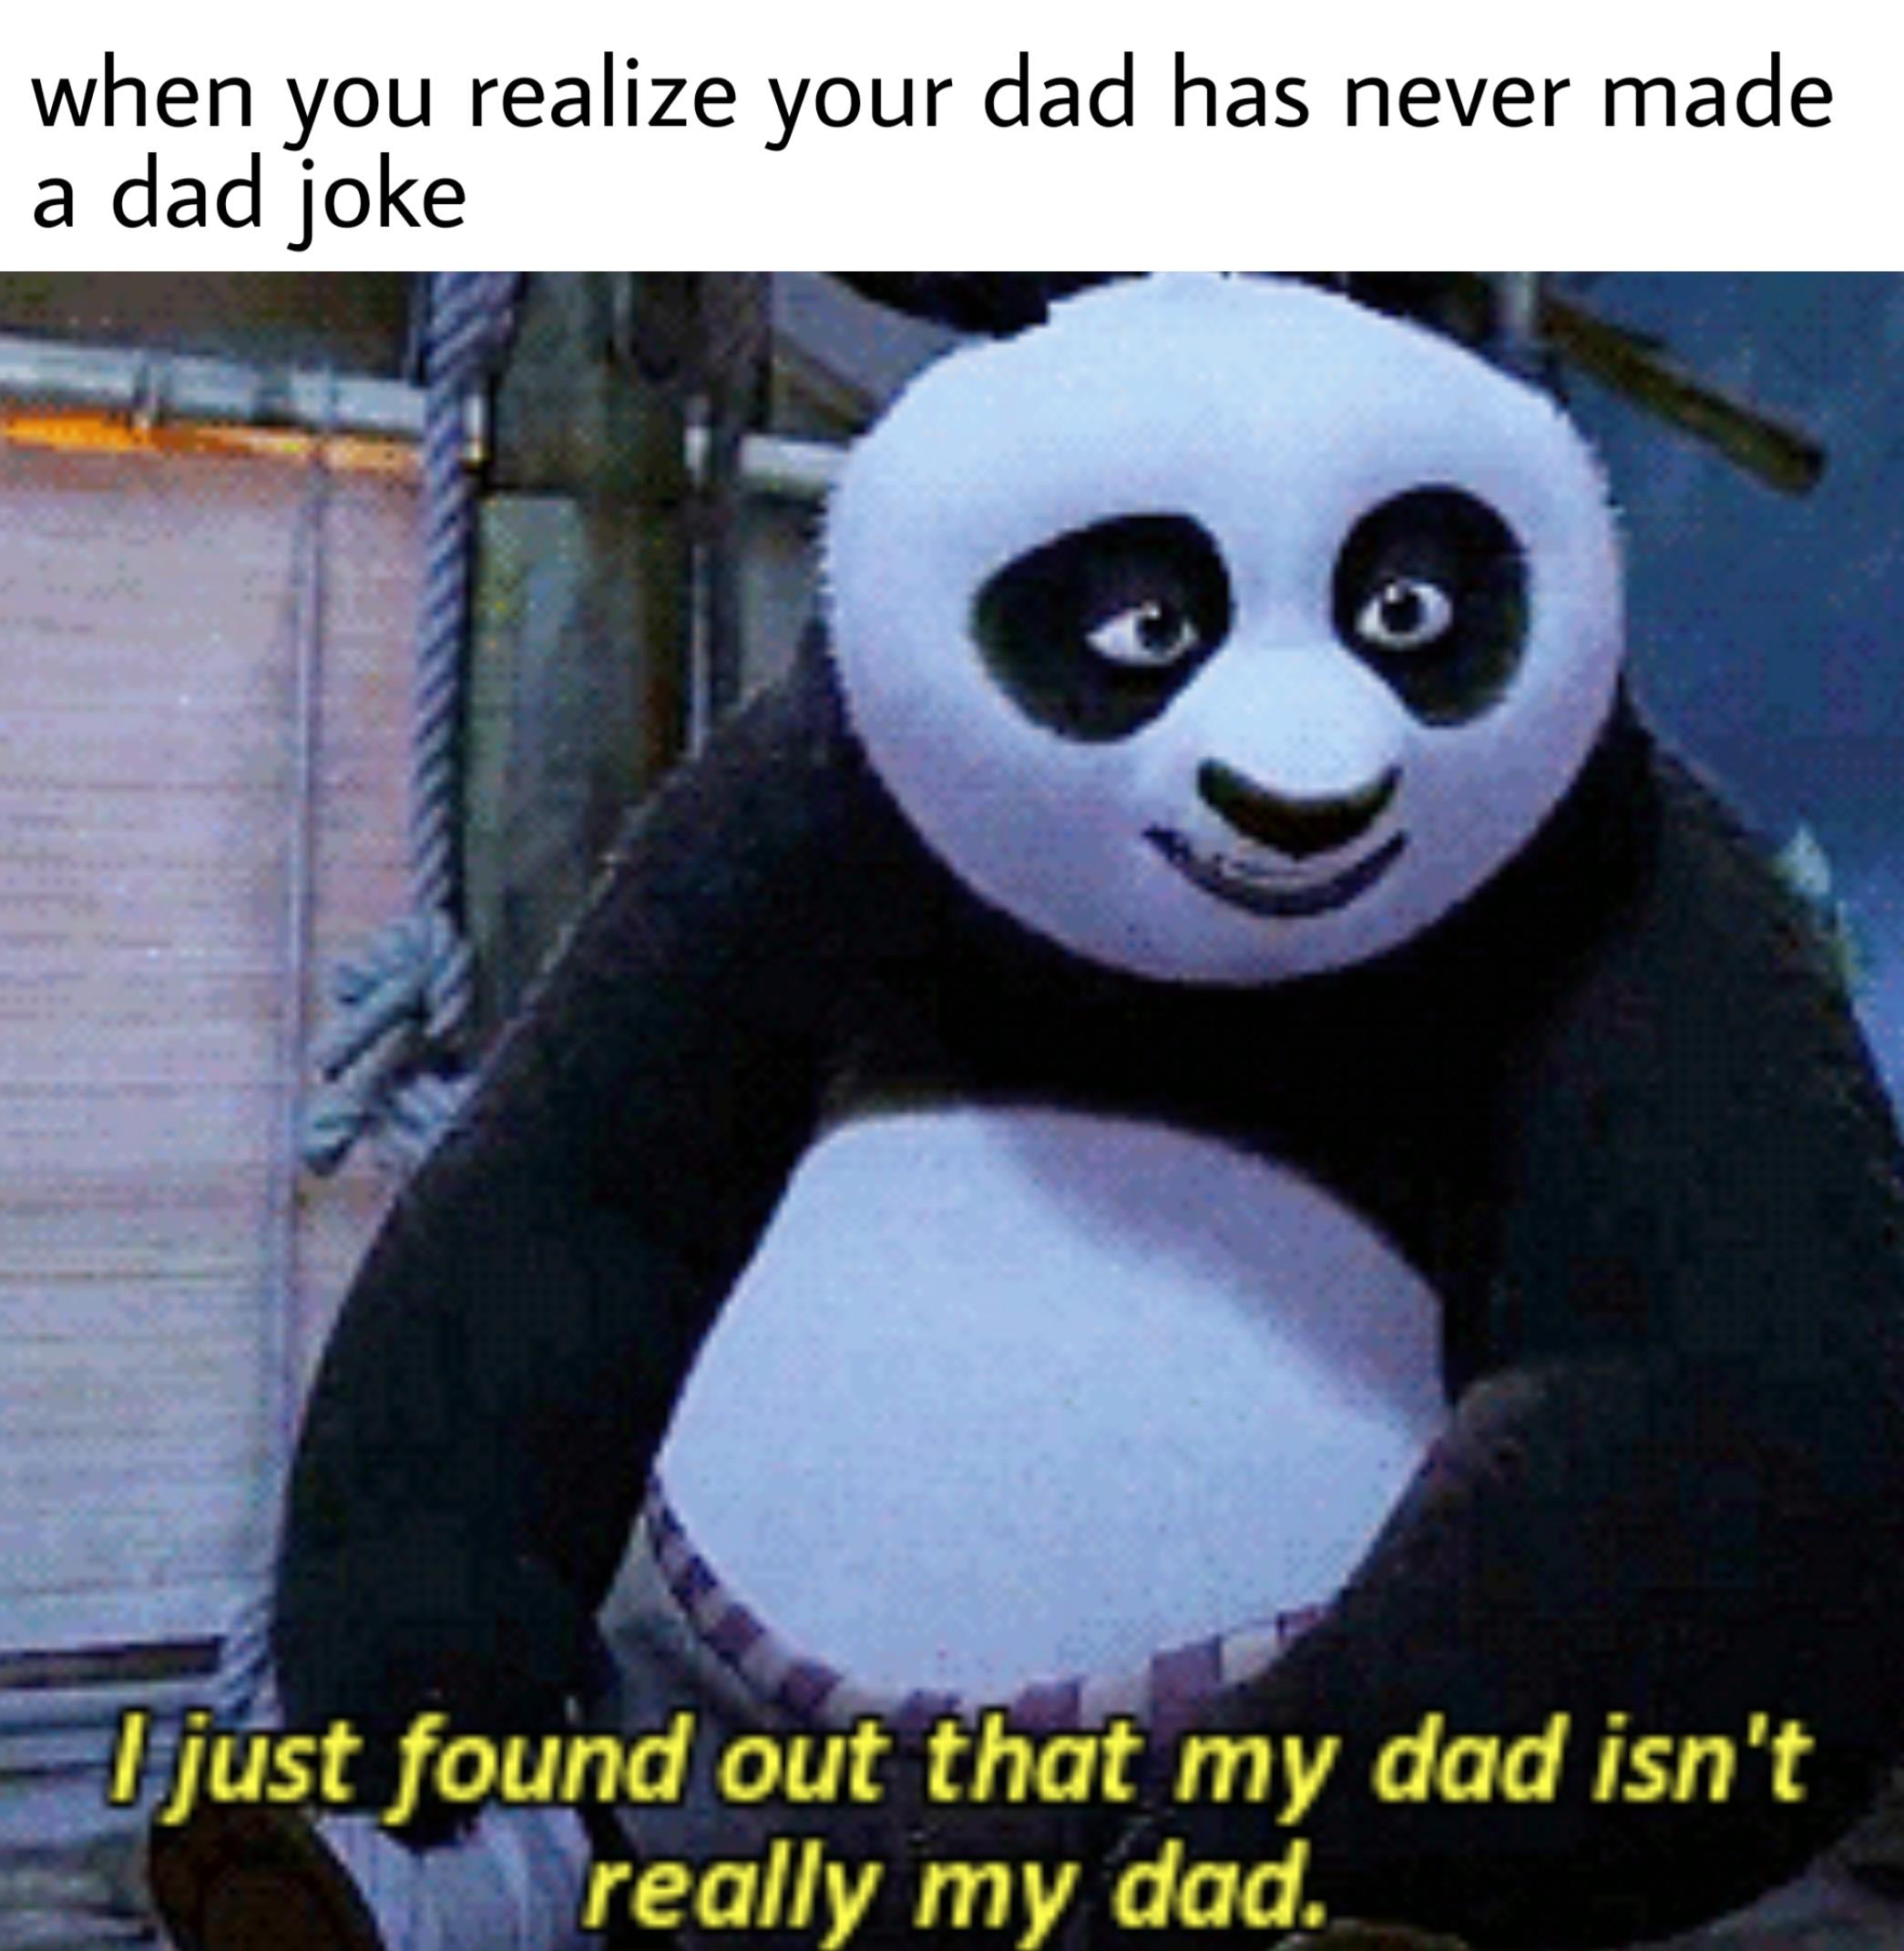 memes - you are not my dad - when you realize your dad has never made a dad joke I just found out that my dad isn't really my dad.